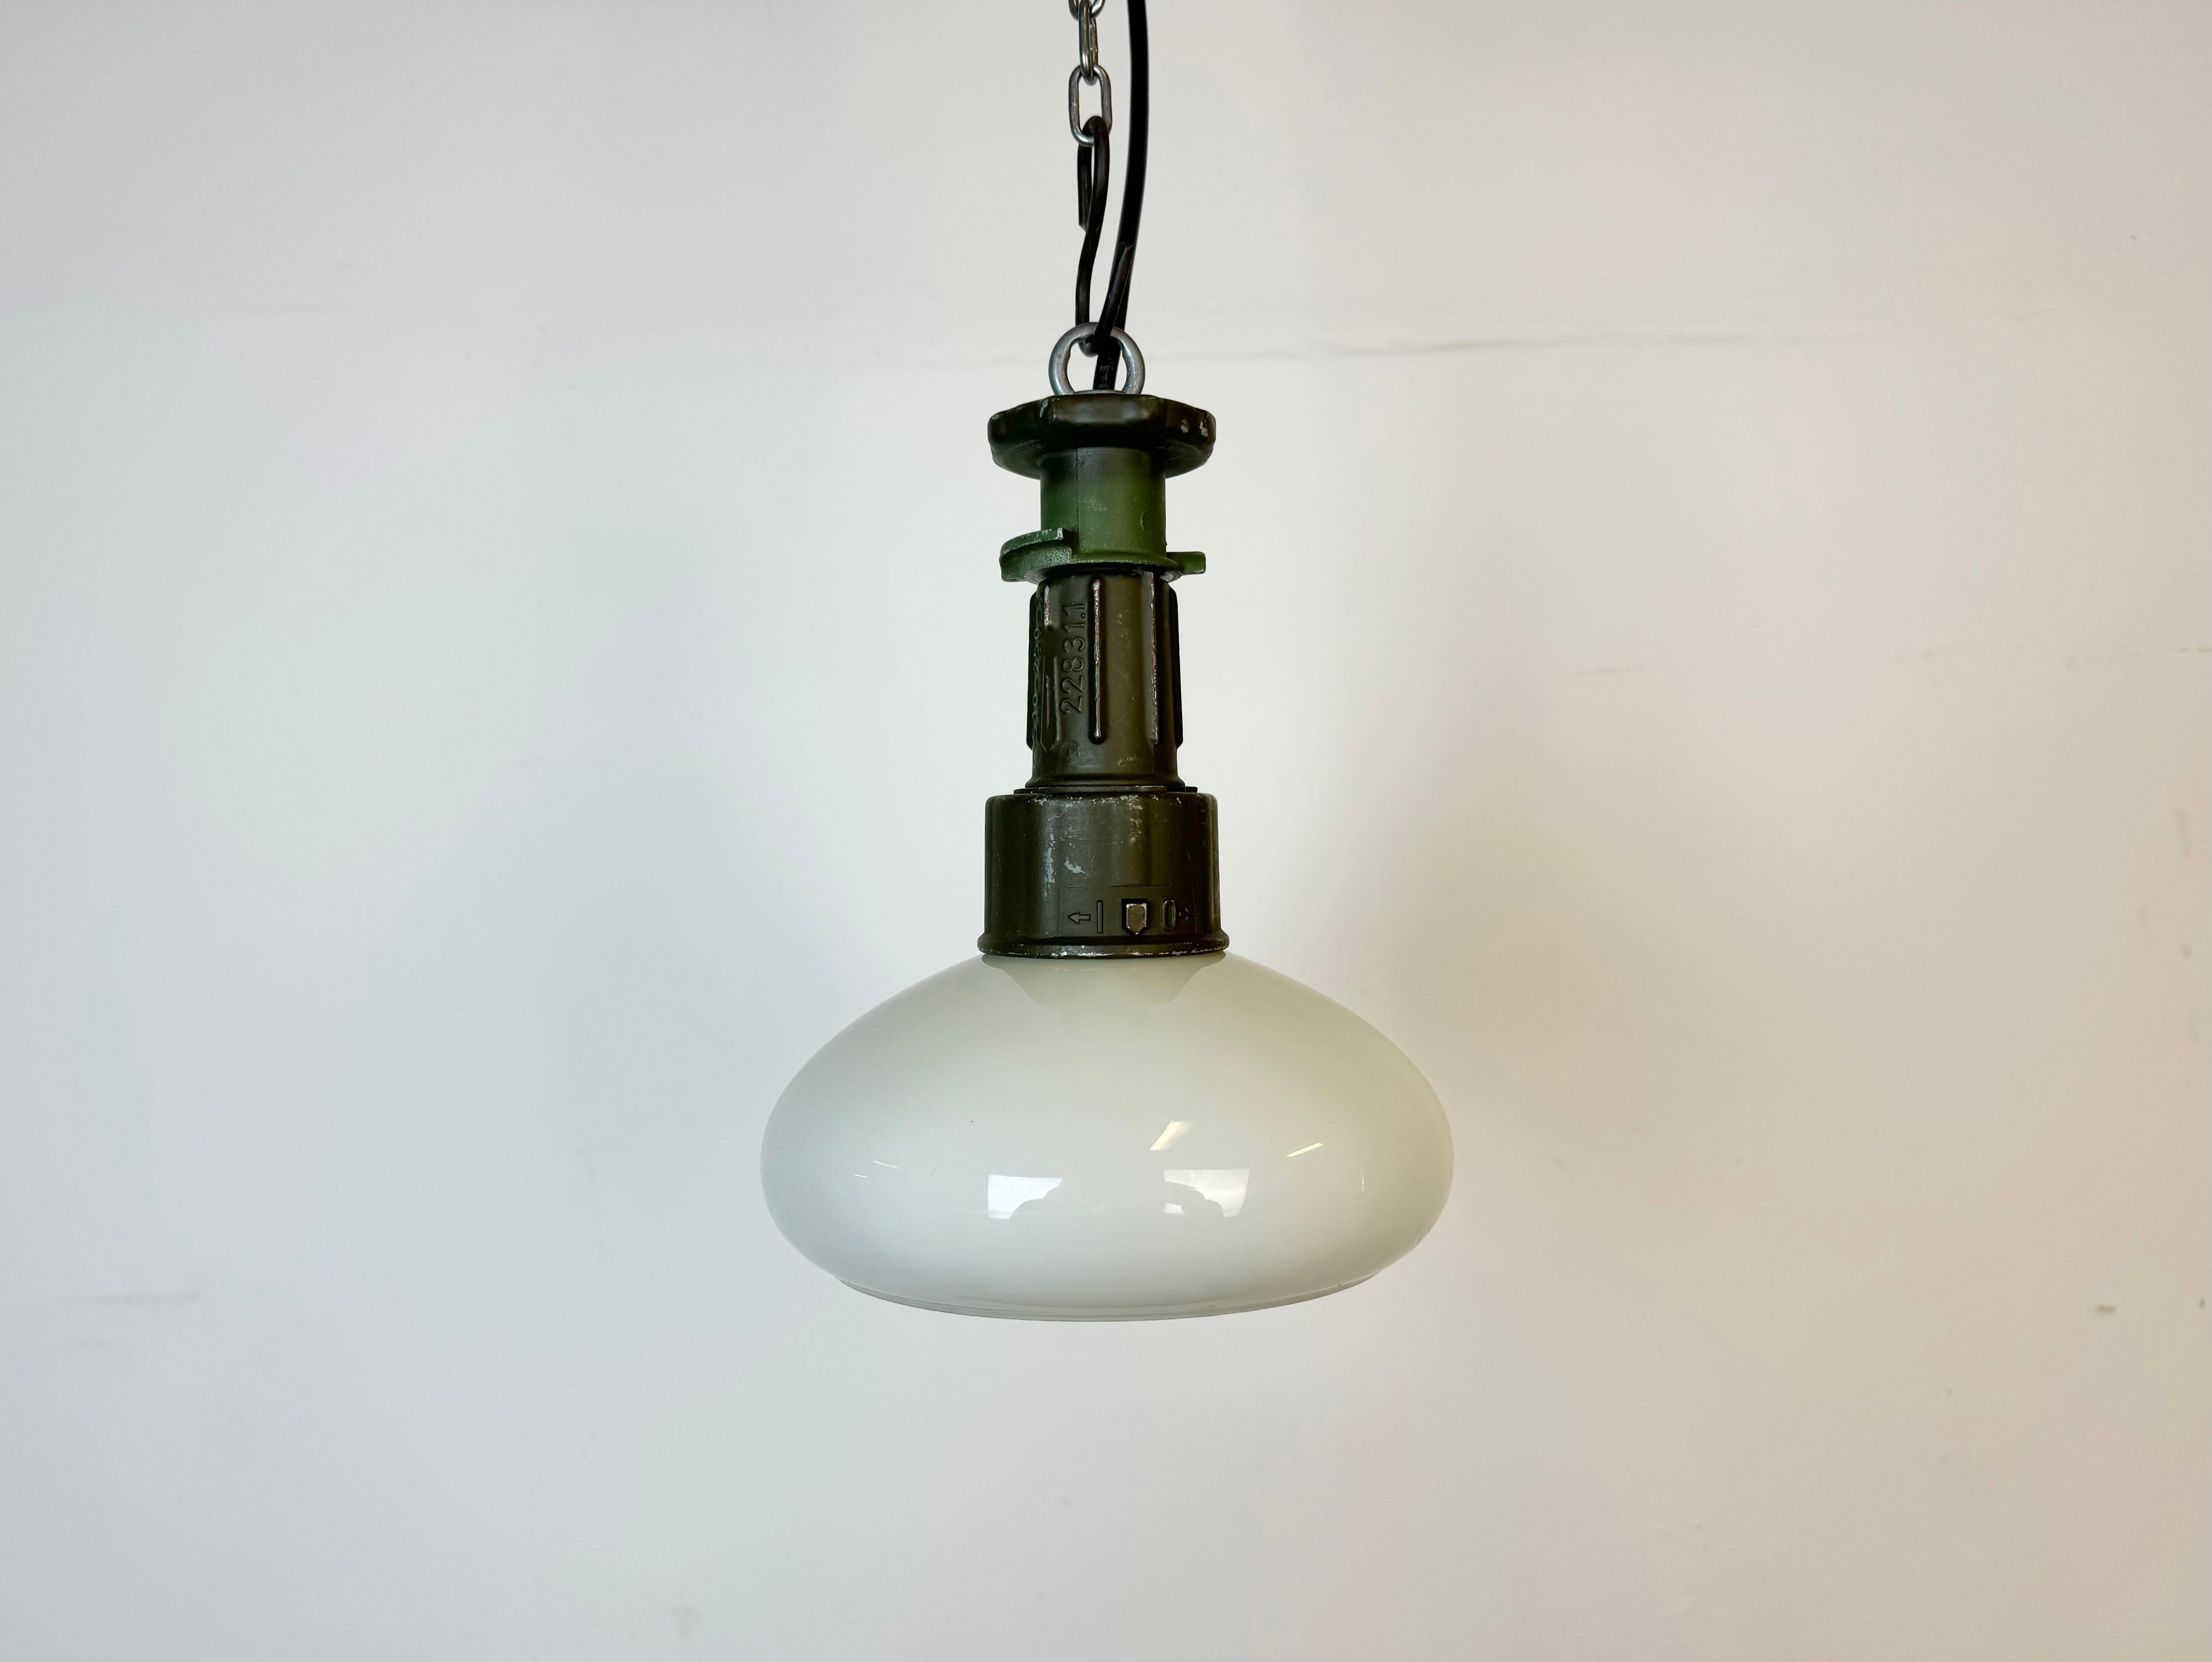 Industrial army pendant light made in Poland during the 1960s.It features green cast aluminium top and a milk glass shade. The socket requires standard E 27/ E26 light bulbs. New wire. The weight of the lamp is 1 kg. The diameter of the shade is 18